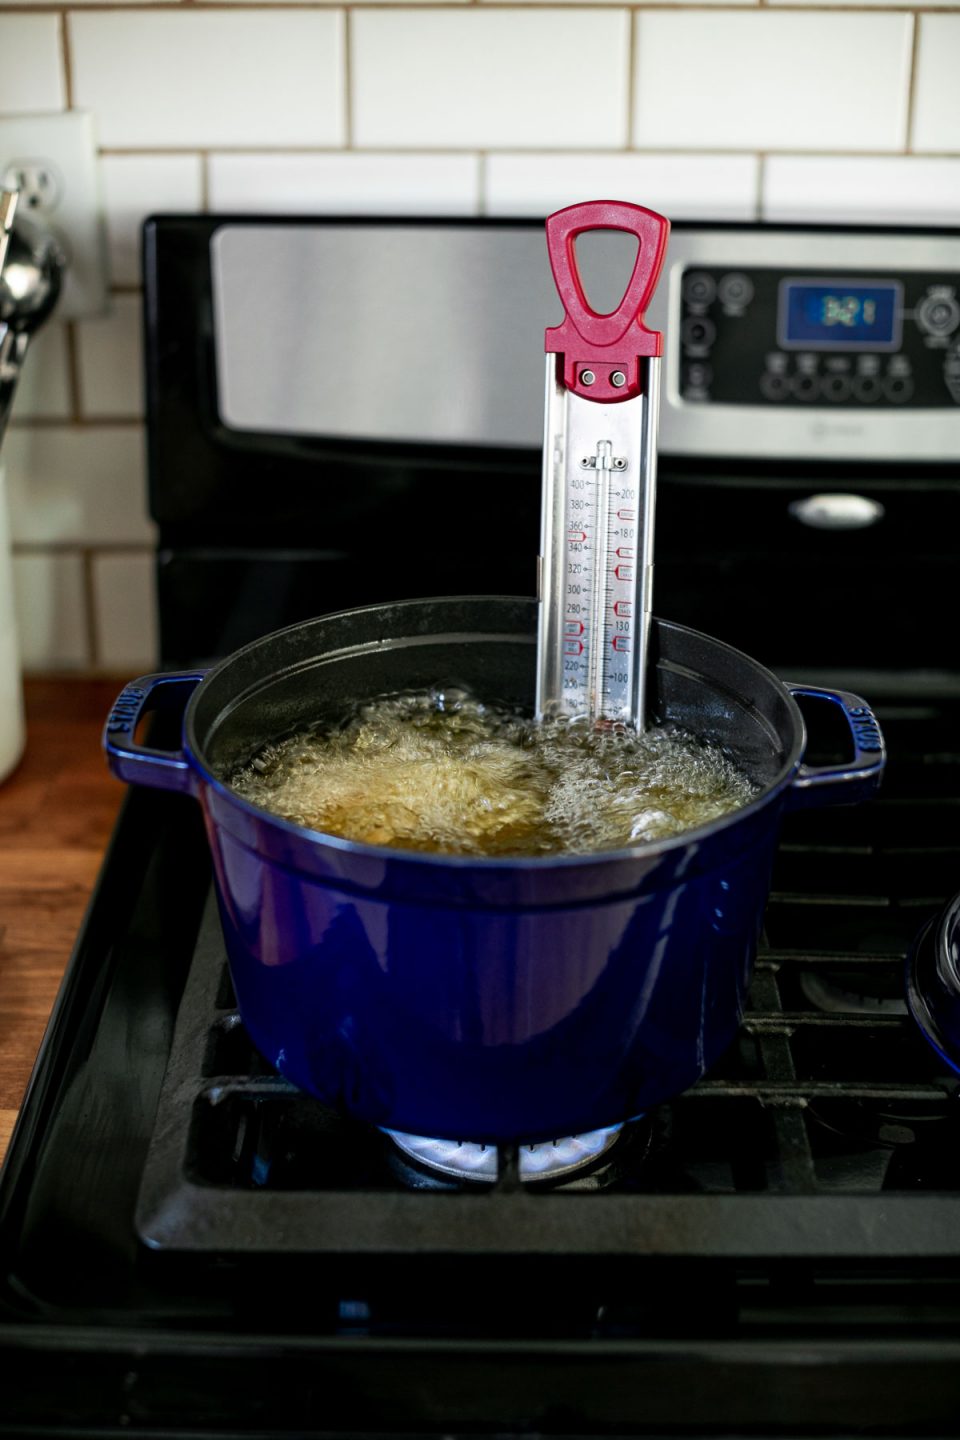 An angled shot of a single blue Staub Tall Cocotte sits on top of a gas stovetop range filled with boiling herb & garlic infused frying oil. Inside the oil pieces of fried chicken are being deep fried. A candy thermometer rests inside the cocotte to watch the temperature of the frying oil.